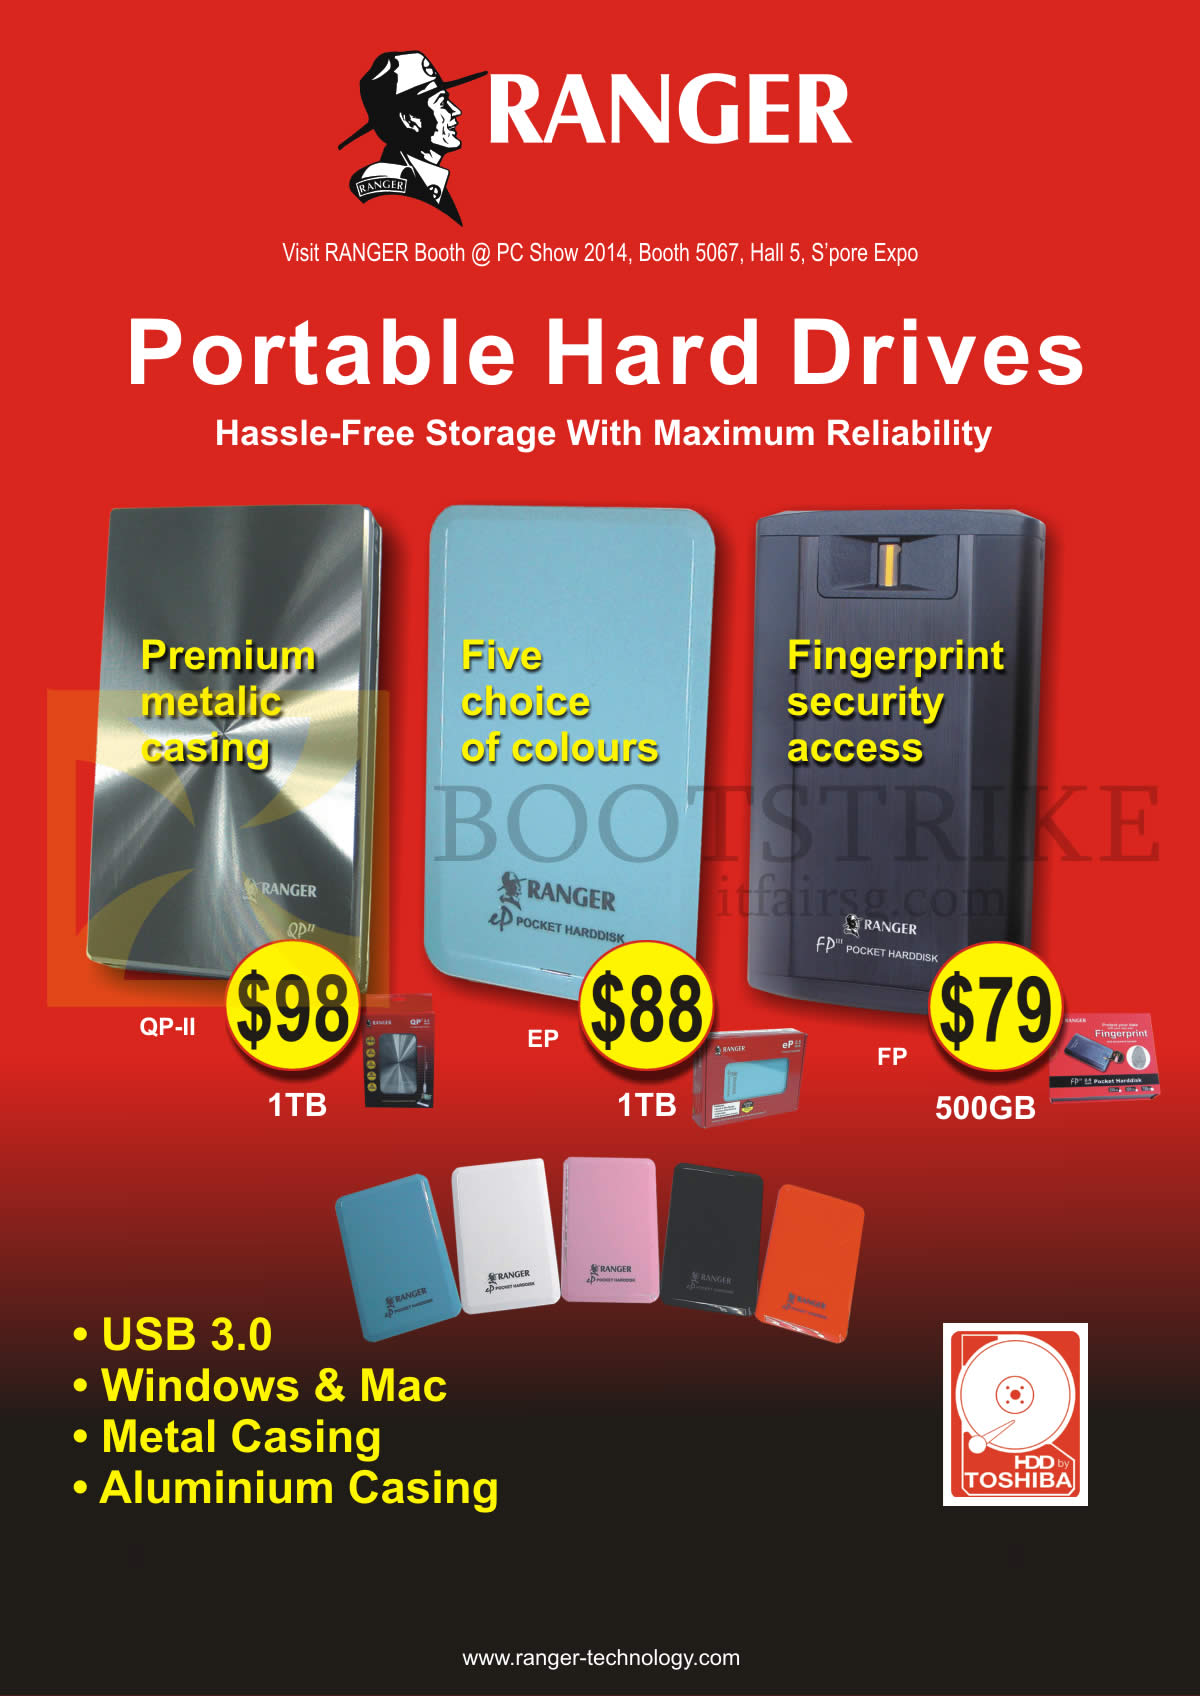 PC SHOW 2014 price list image brochure of Systems Tech Ranger External Storage Hard Disk Drives, QP-II 1TB, EP 1TB, FP 500GB